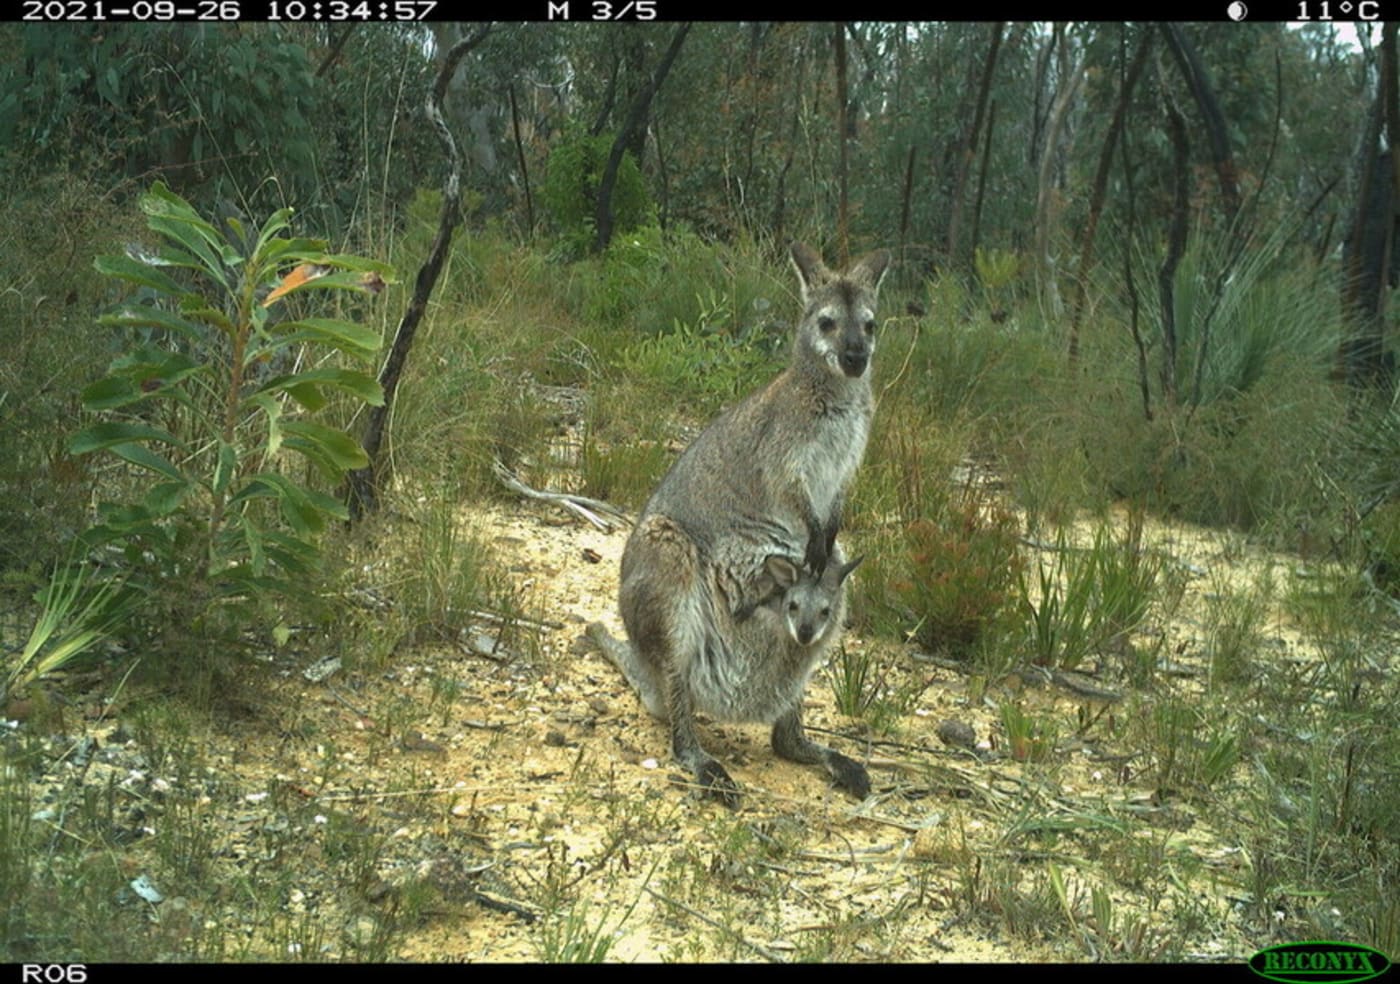 A sensor camera photo of a red-necked wallaby and joey in the NSW Blue Mountains, taken as part of the Eyes on Recovery project.

Eyes on Recovery is a large-scale sensor camera project. and a collaboration between WWF, Conservation International, and local land managers and research organisations. Google-powered AI technology has been trained to identify Australian animals in photos to track the recovery of threatened species following the 2019-20 bushfires.